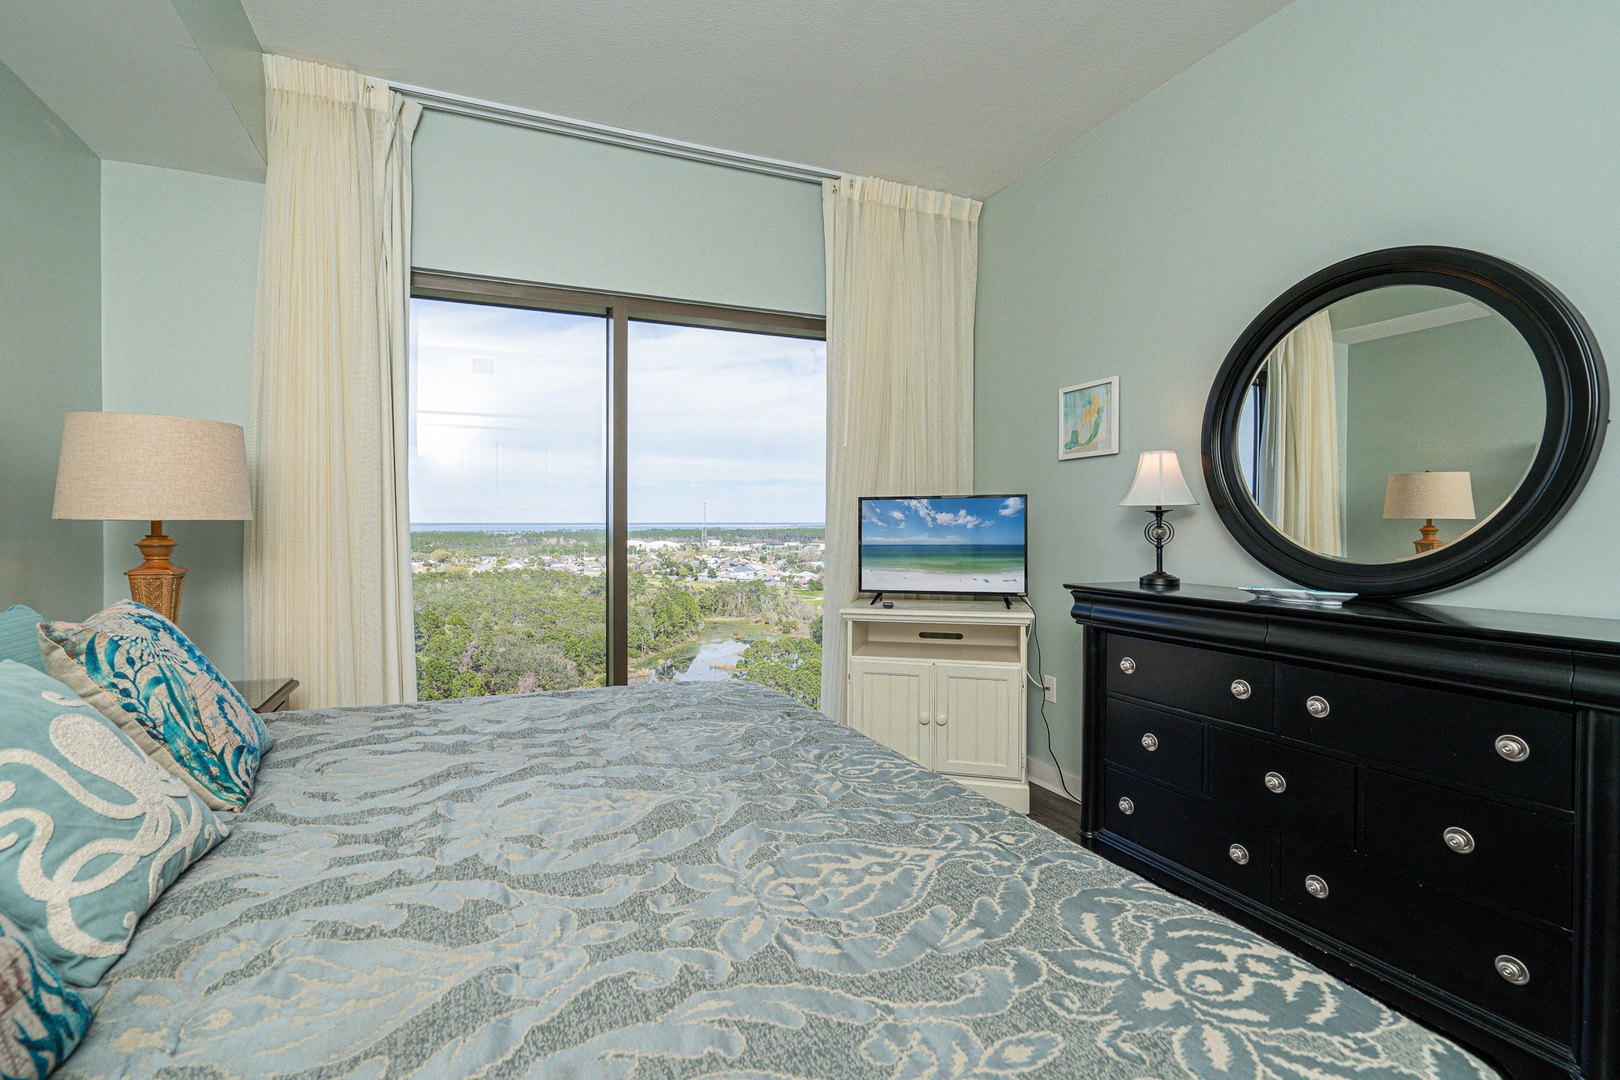 The 2nd bedroom retreat showcases a plush king bed, TV, & gorgeous views